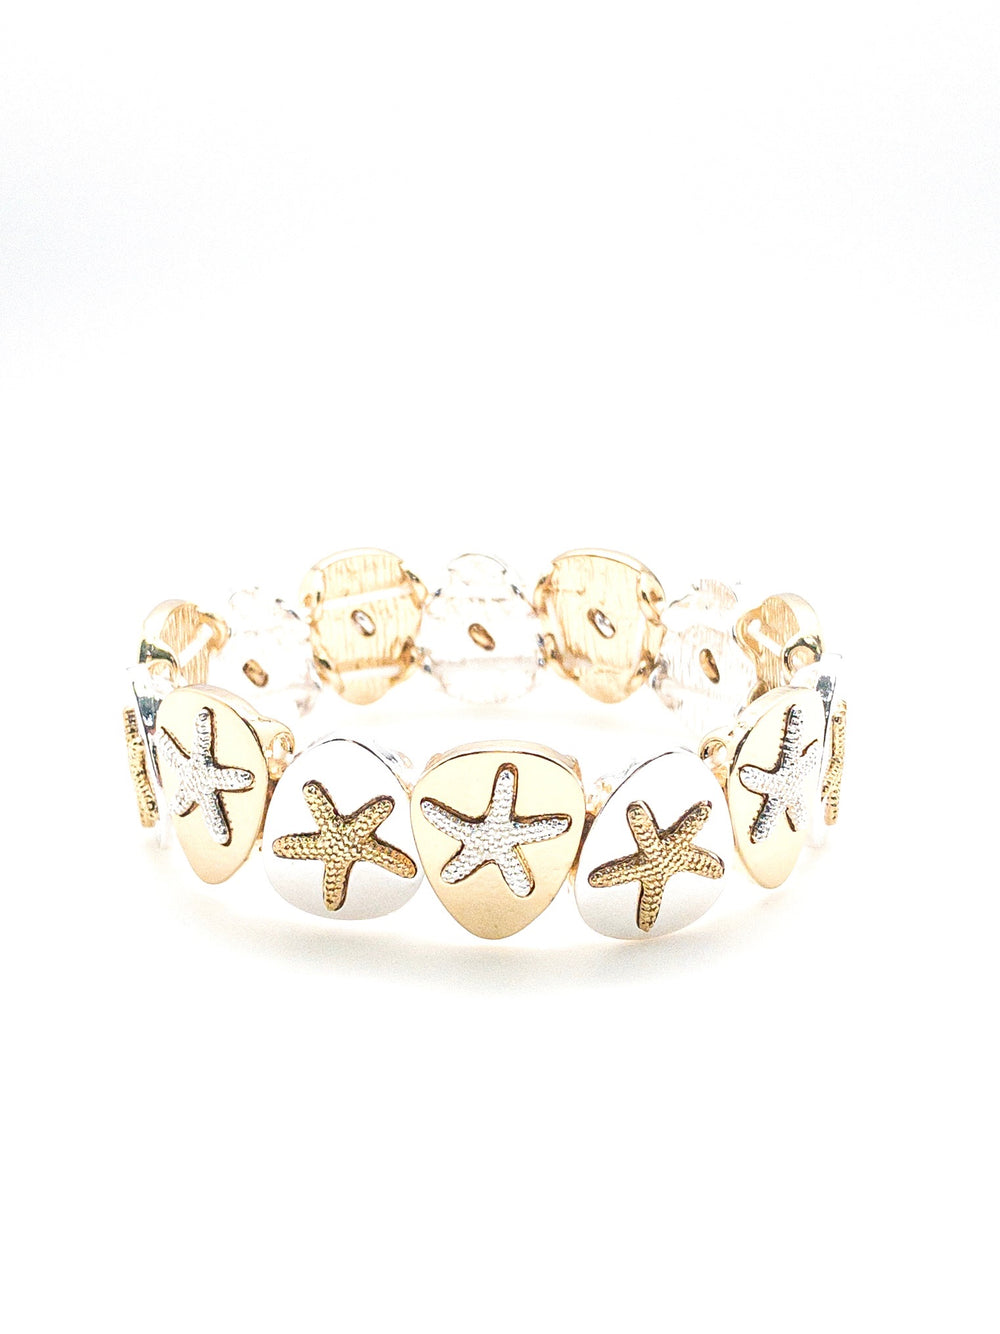 Starfish bracelet- gold and silver 